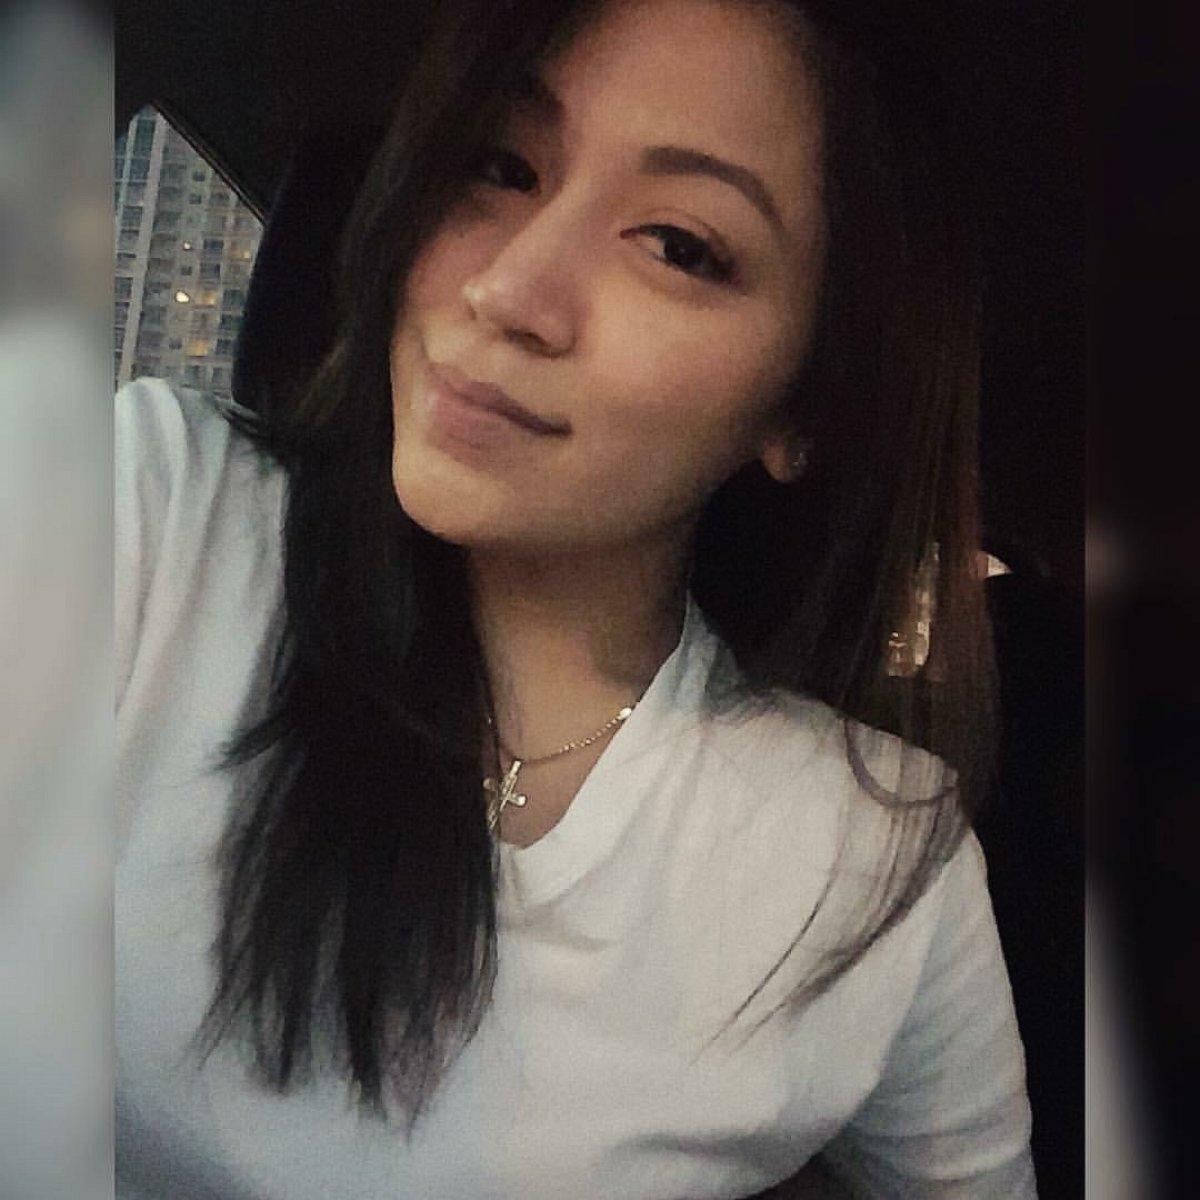 PHOTO: Chelsea Ake Salvacion, who worked at a Las Vegas day spa, was found dead inside one of the spa's cryotherapy machines. 